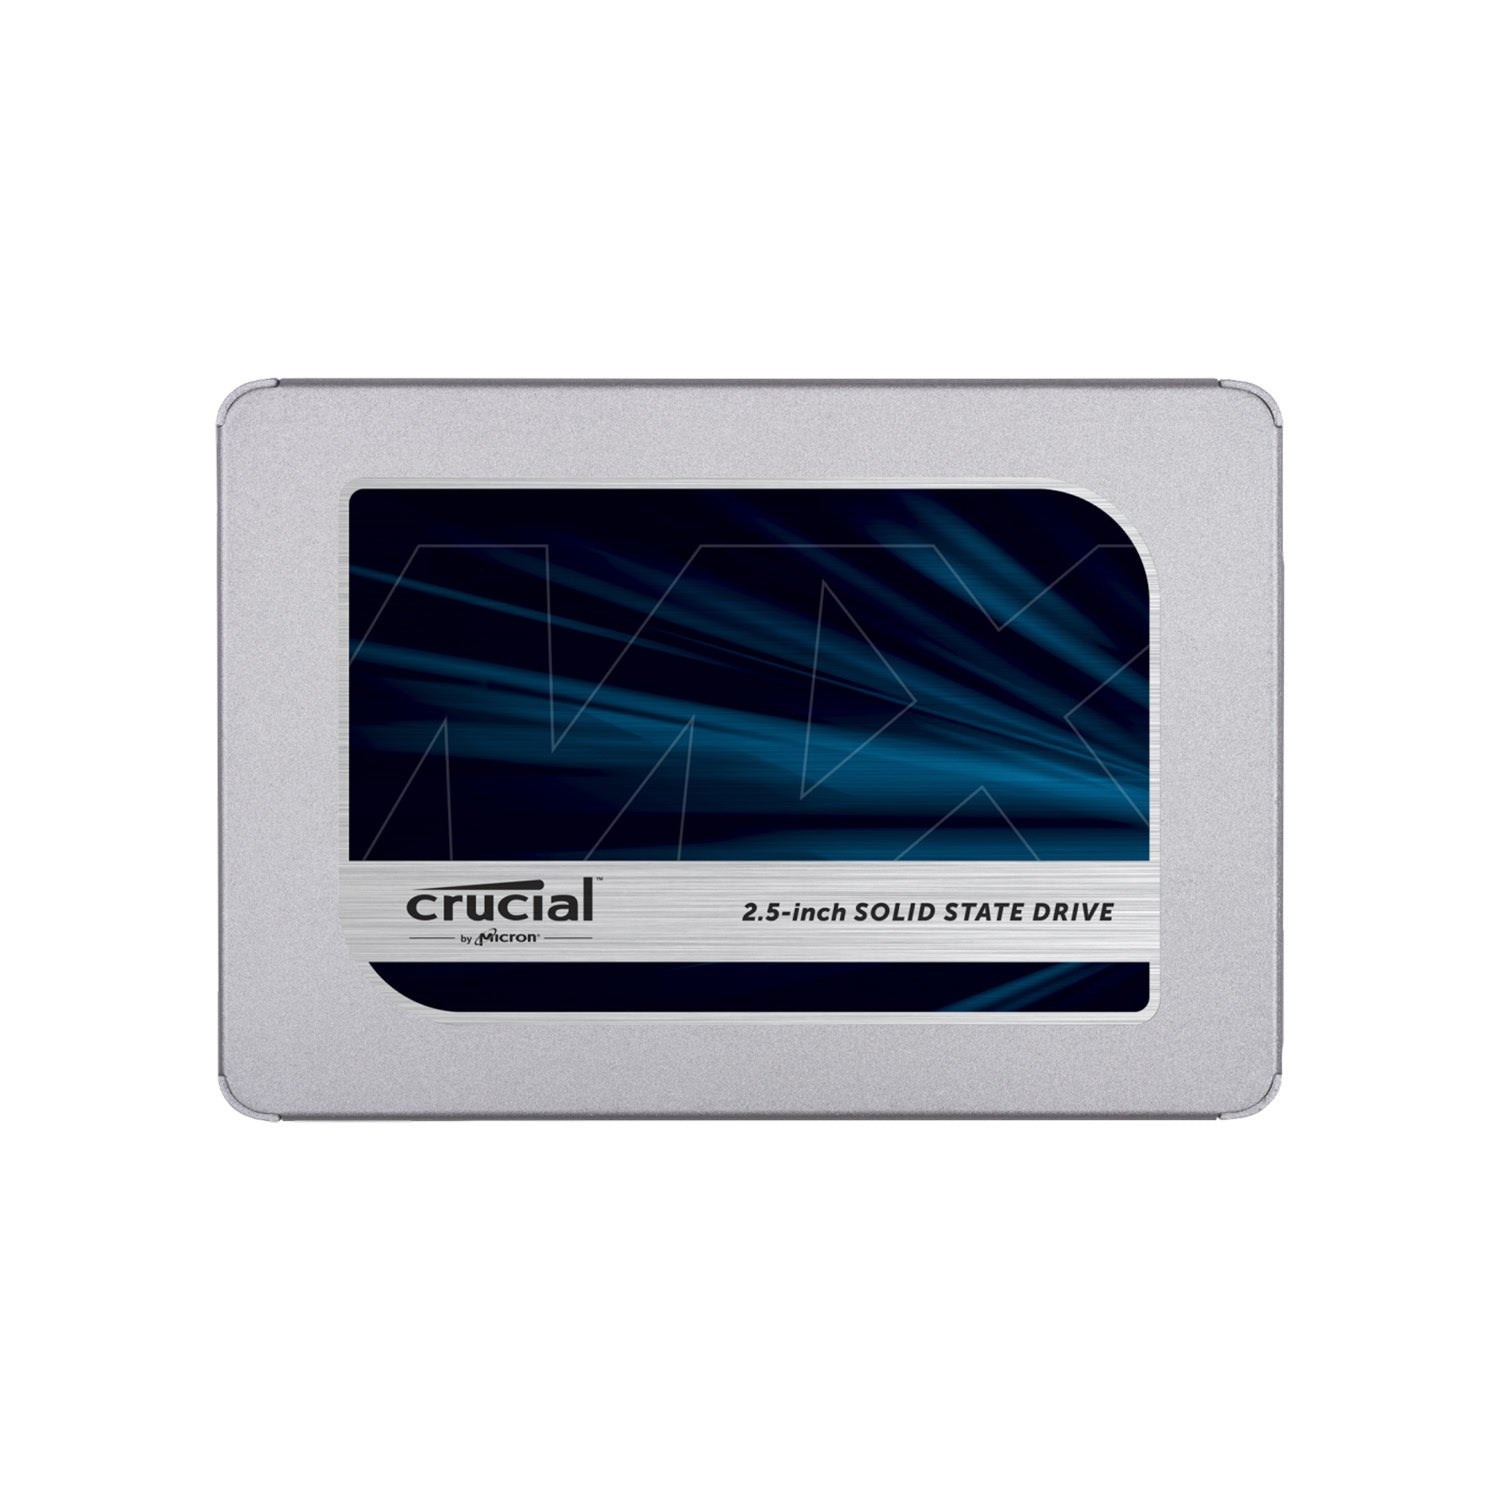 Crucial MX500 250GB SSD, SATA III 6 Gb/s Interface | Up to 560 MB/s Sequential Read Speed (CT250MX500SSD1)